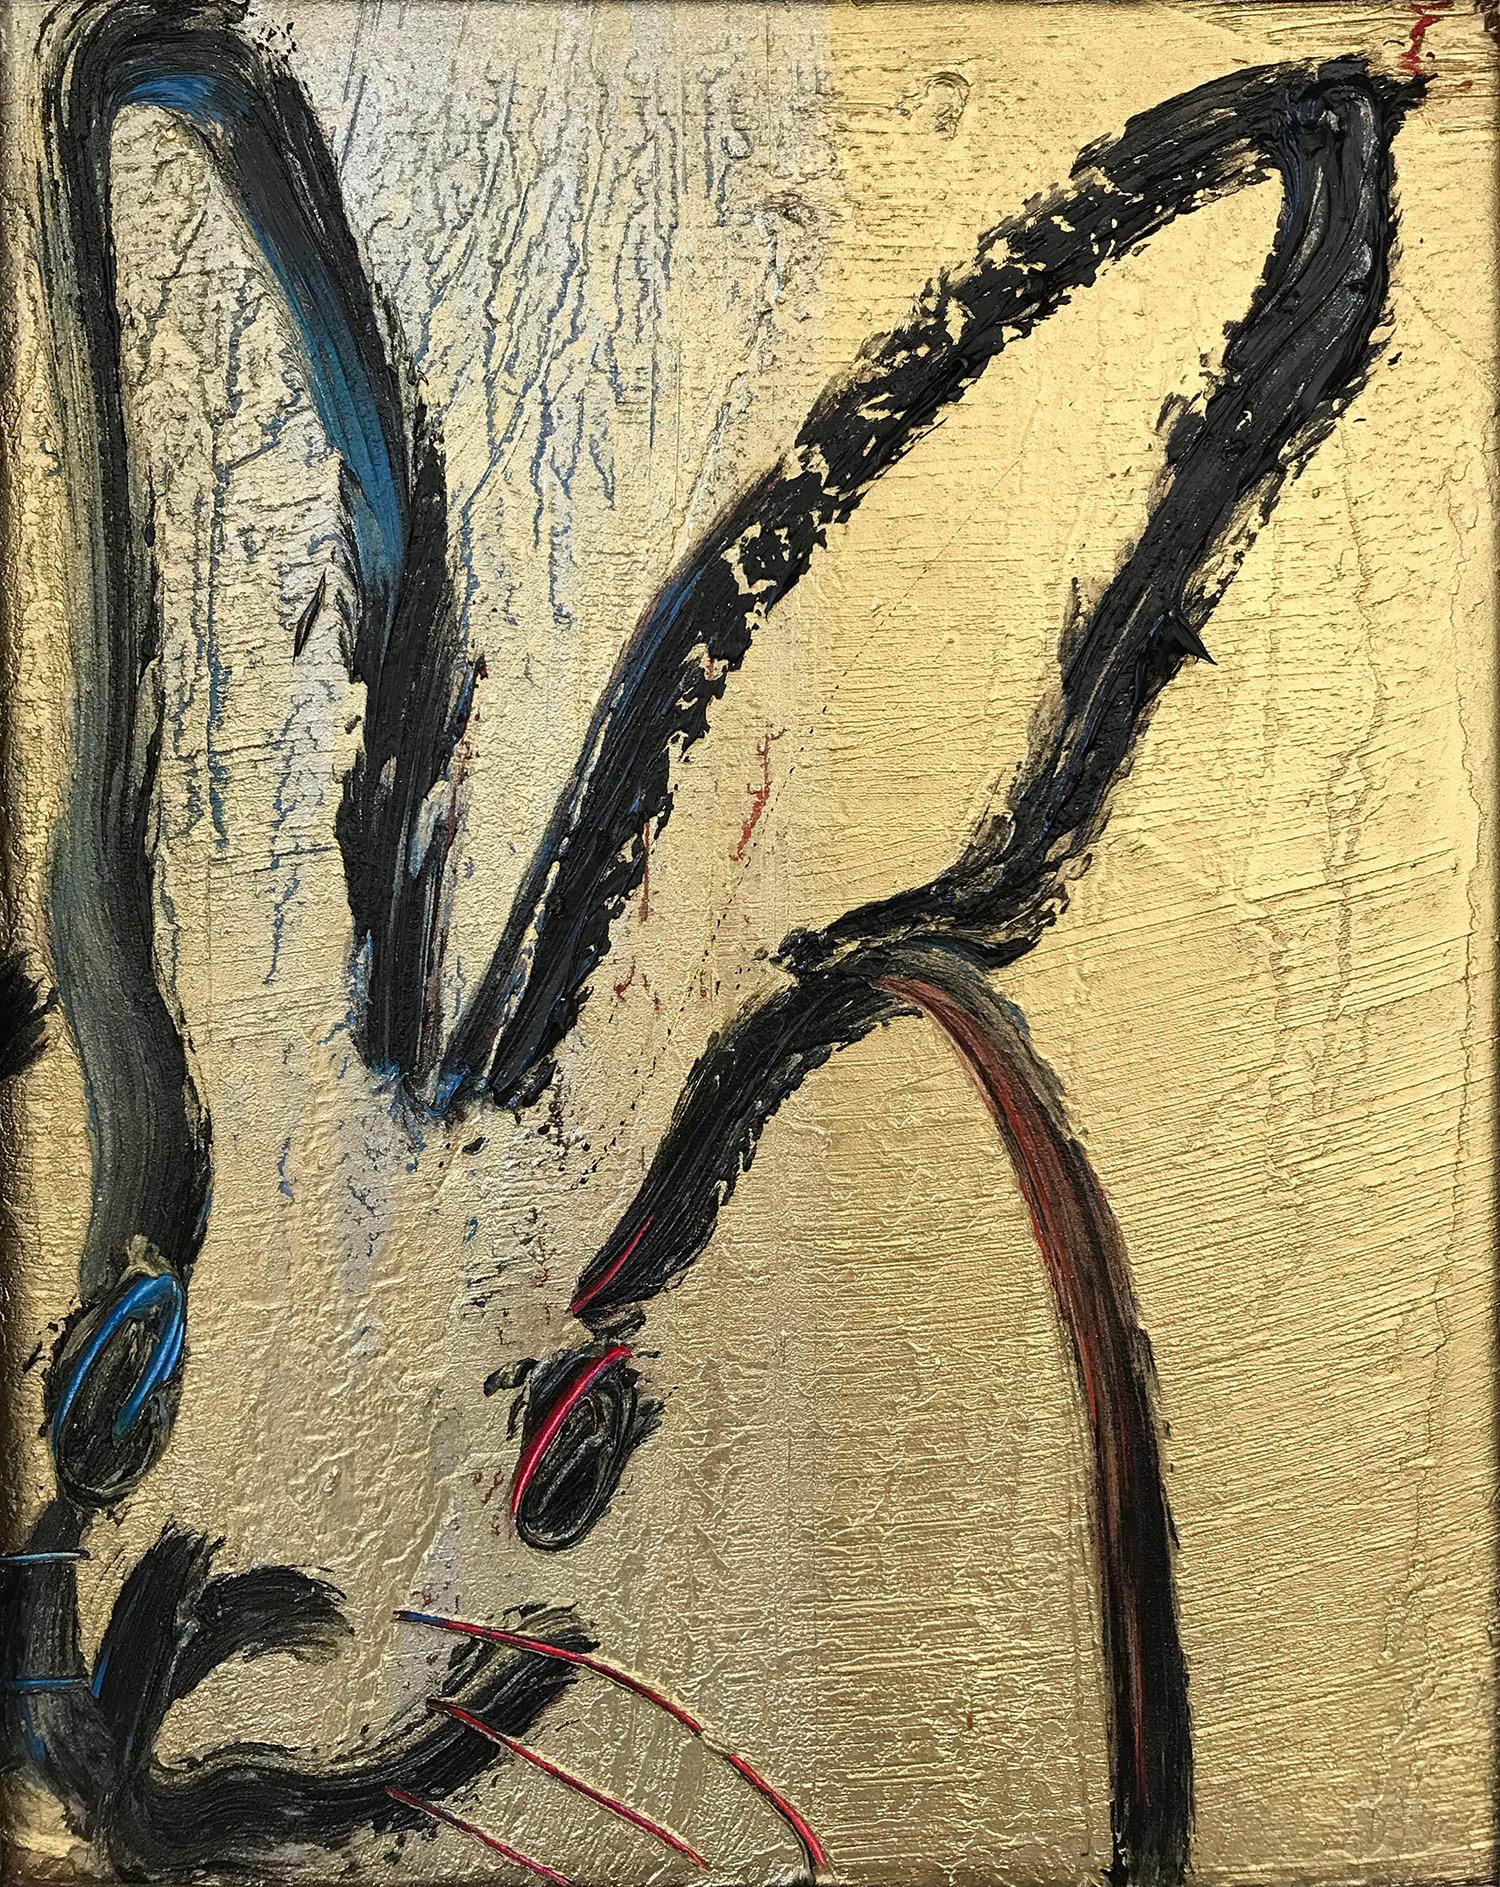 Untitled (Bunny on Gold, Silver) - Painting by Hunt Slonem